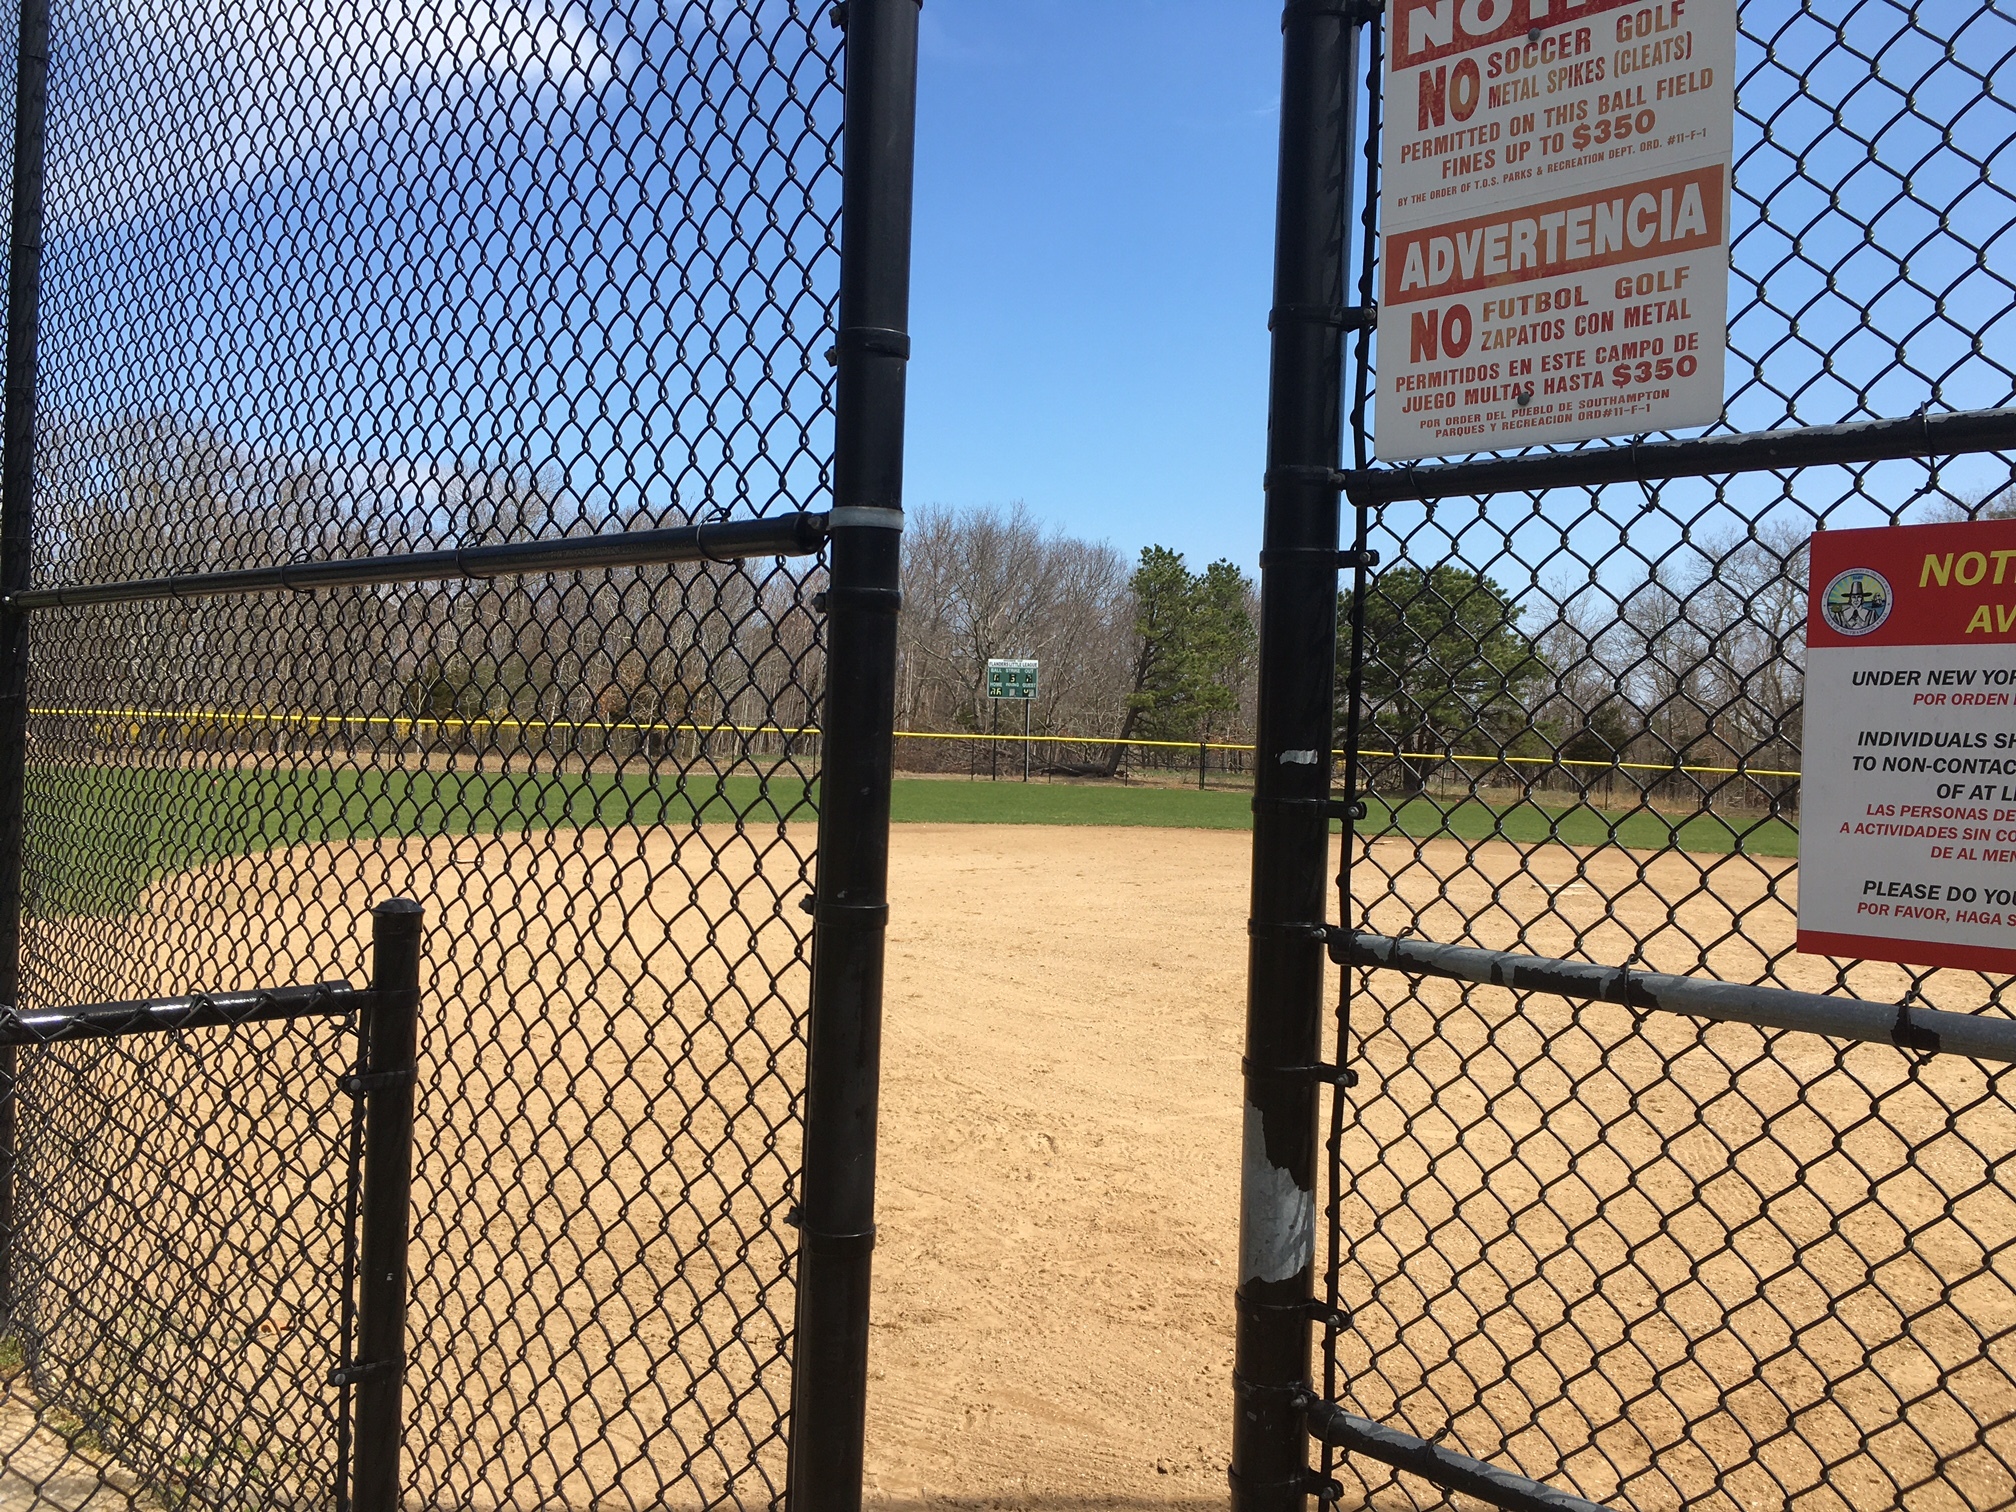 On a sunny spring Saturday, the ballfield at Iron Point Park is empty.